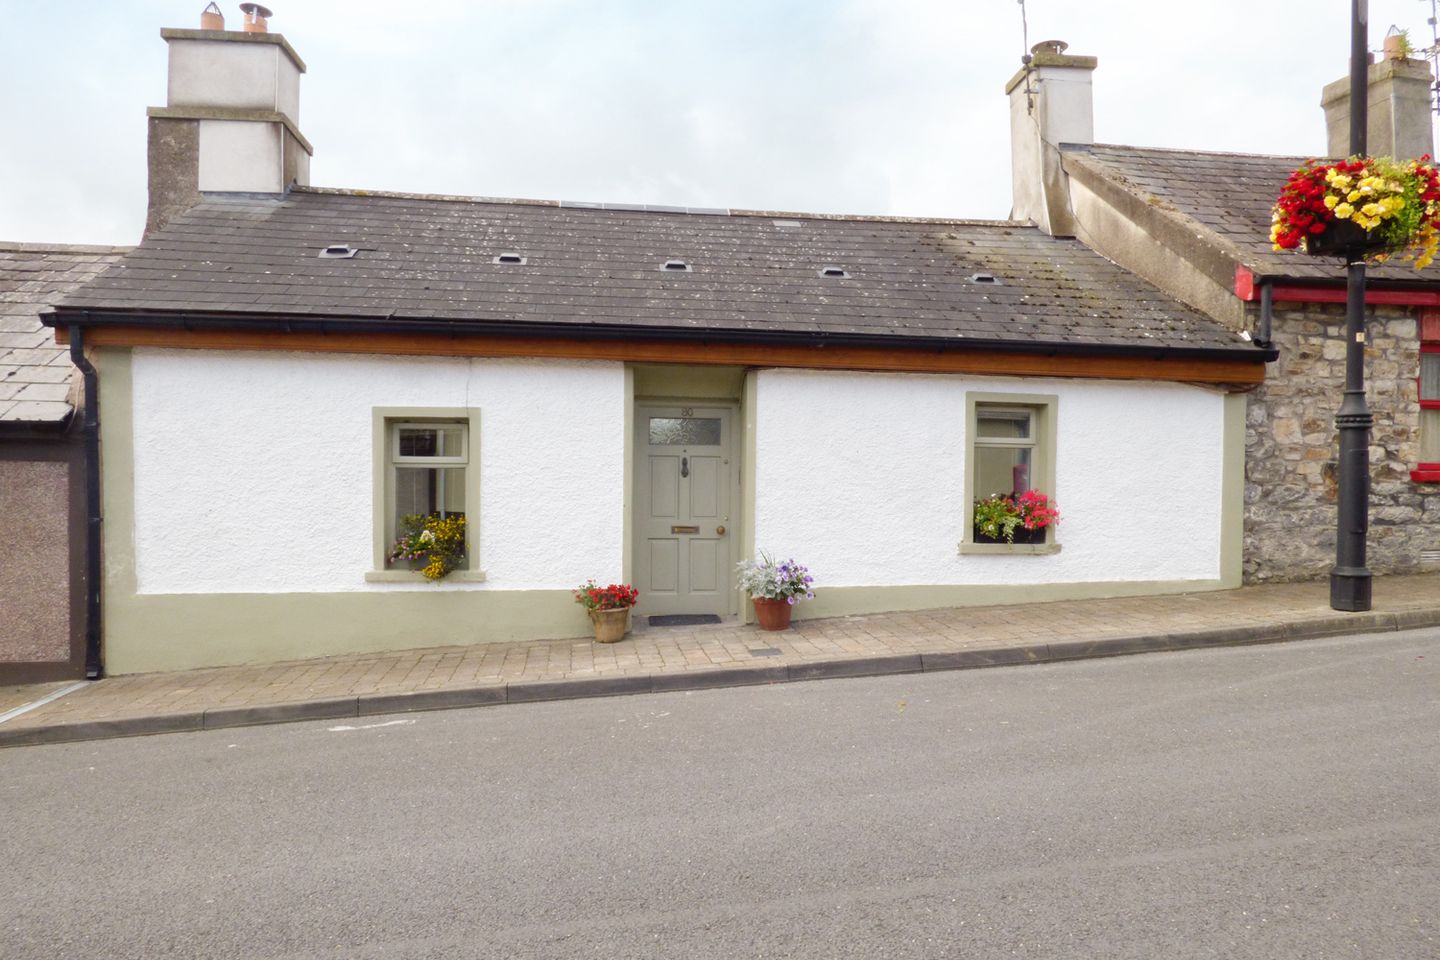 Ref. 955120 80 New Street, 80 New Street, Lismore, Co. Waterford